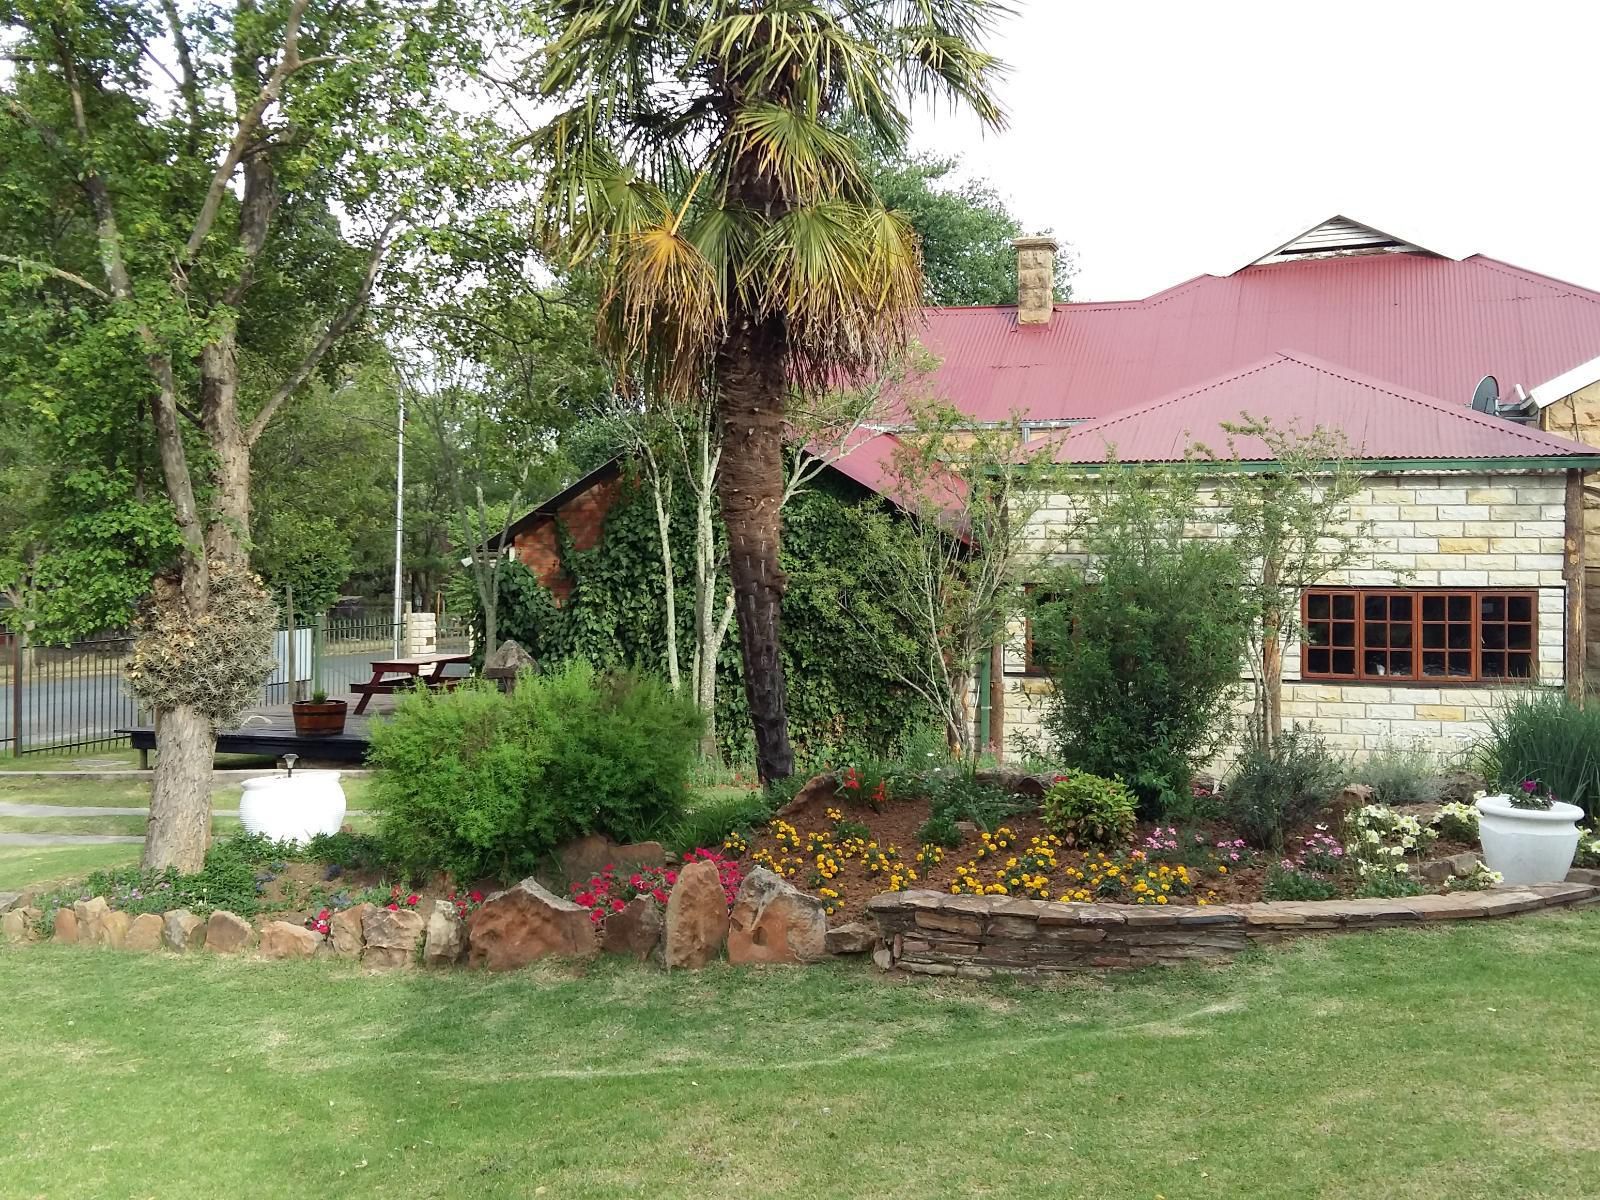 Bella Rosa Guest House Ficksburg Free State South Africa House, Building, Architecture, Palm Tree, Plant, Nature, Wood, Garden